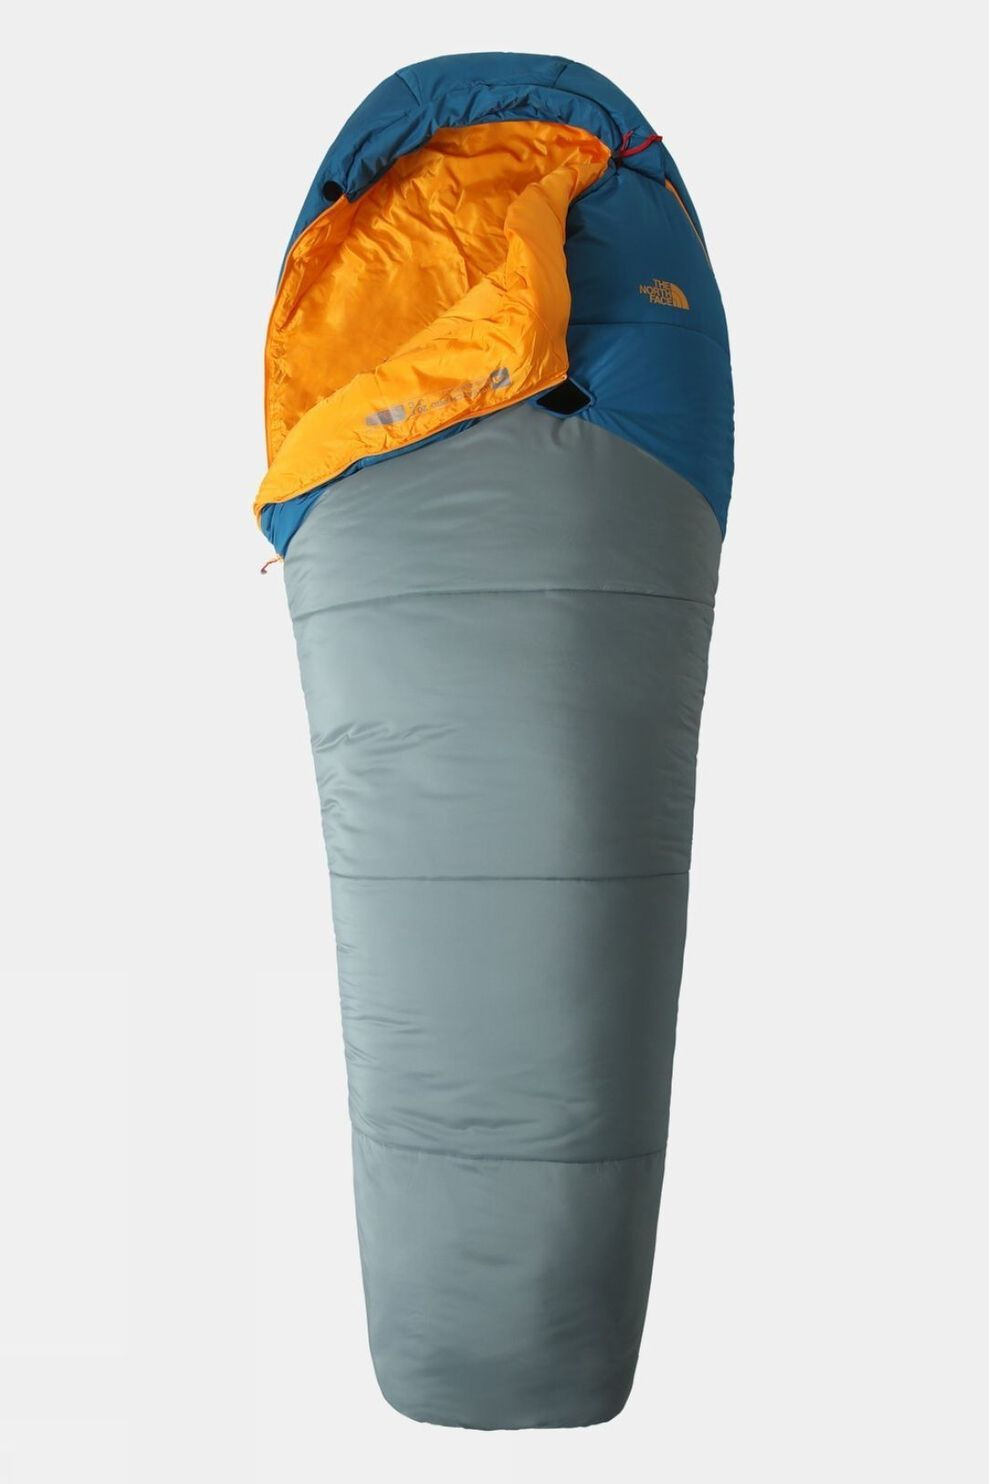 The North Face Wasatch Pro 20 Sleeping Bag